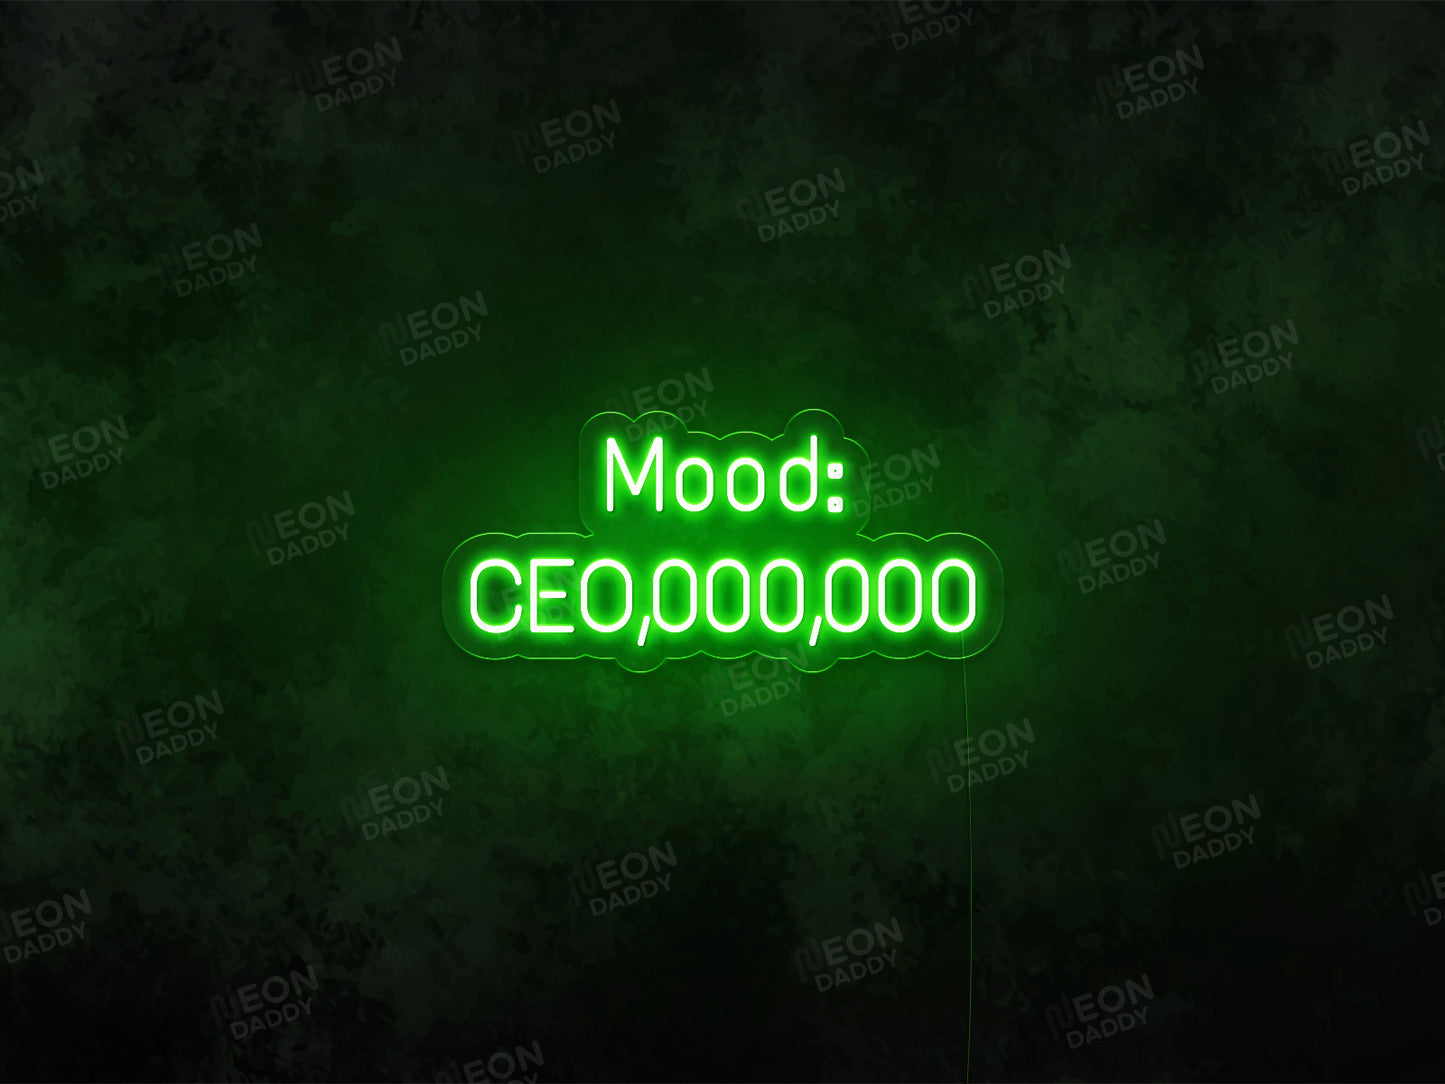 CEO Mood LED Neon Sign